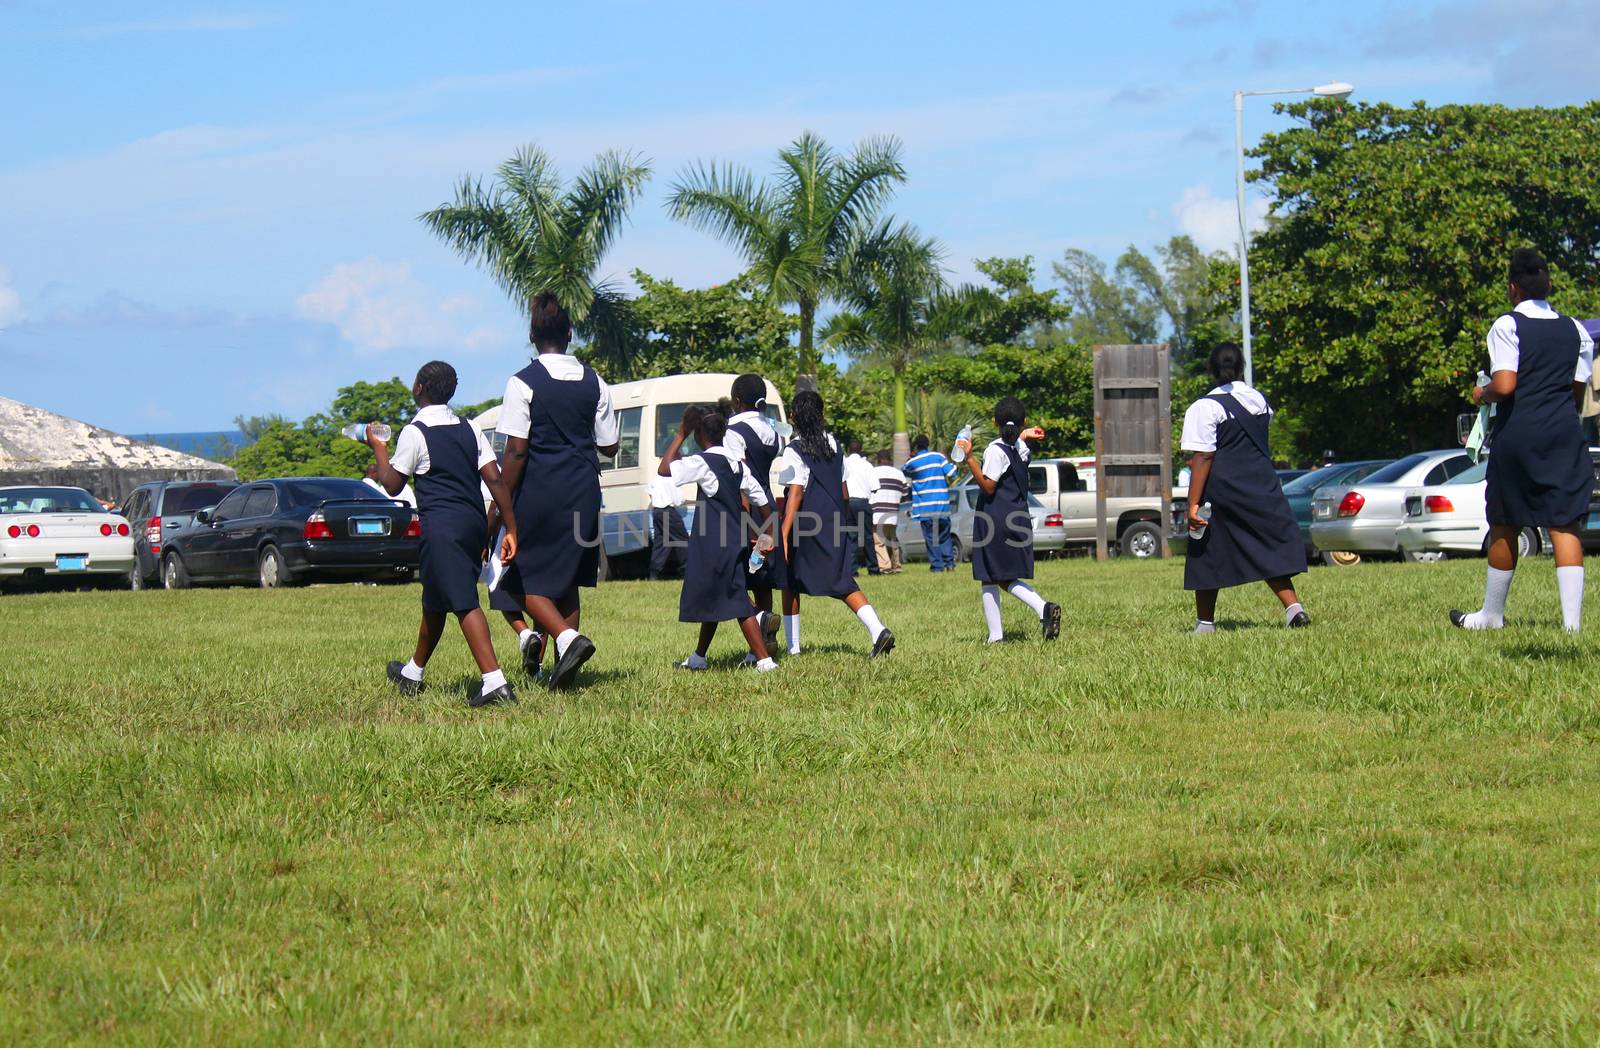 Students from the Bahamas dressed in school uniform go to a gathering or festival in the outdoors in Nassau